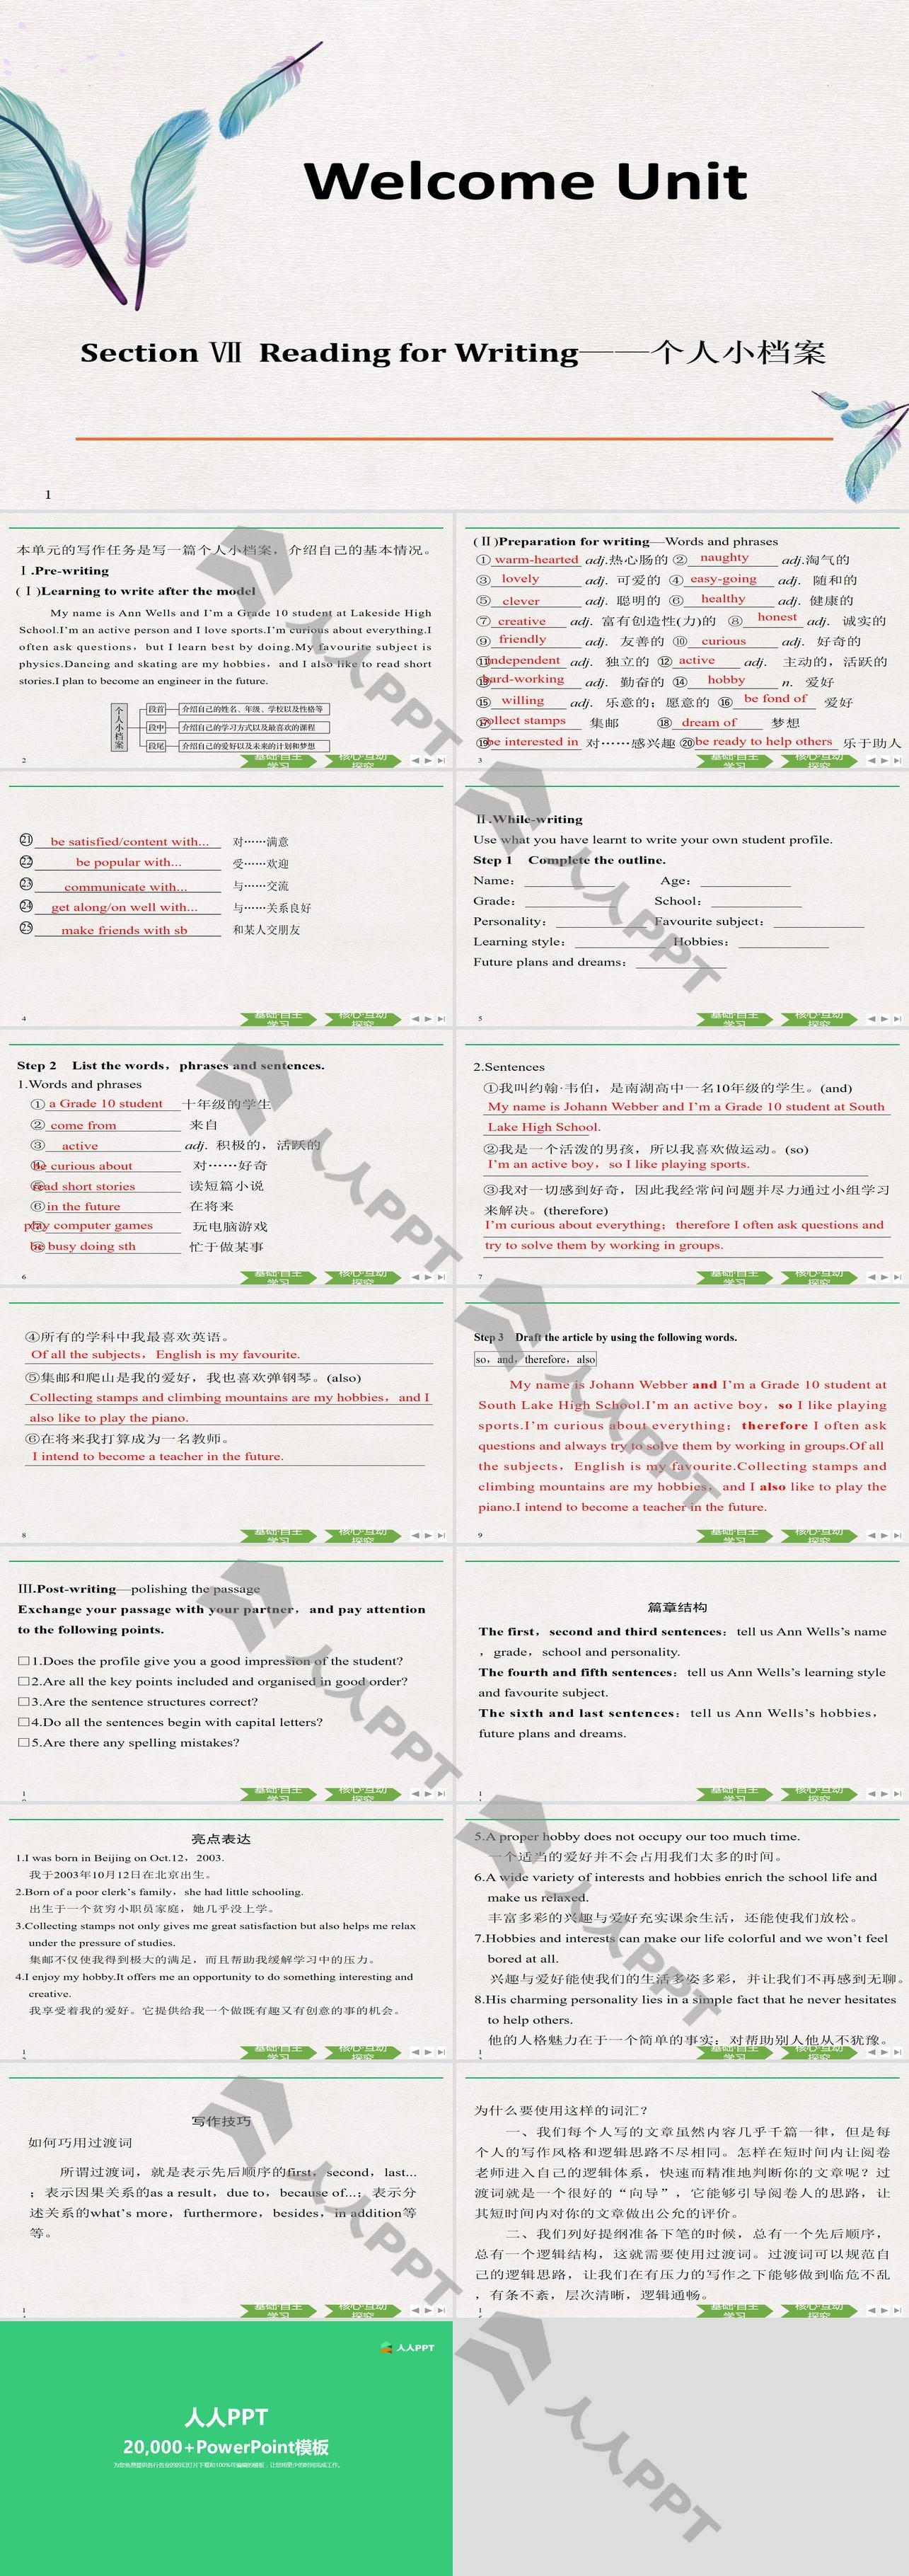 《Welcome Unit》Reading for Writing PPT长图